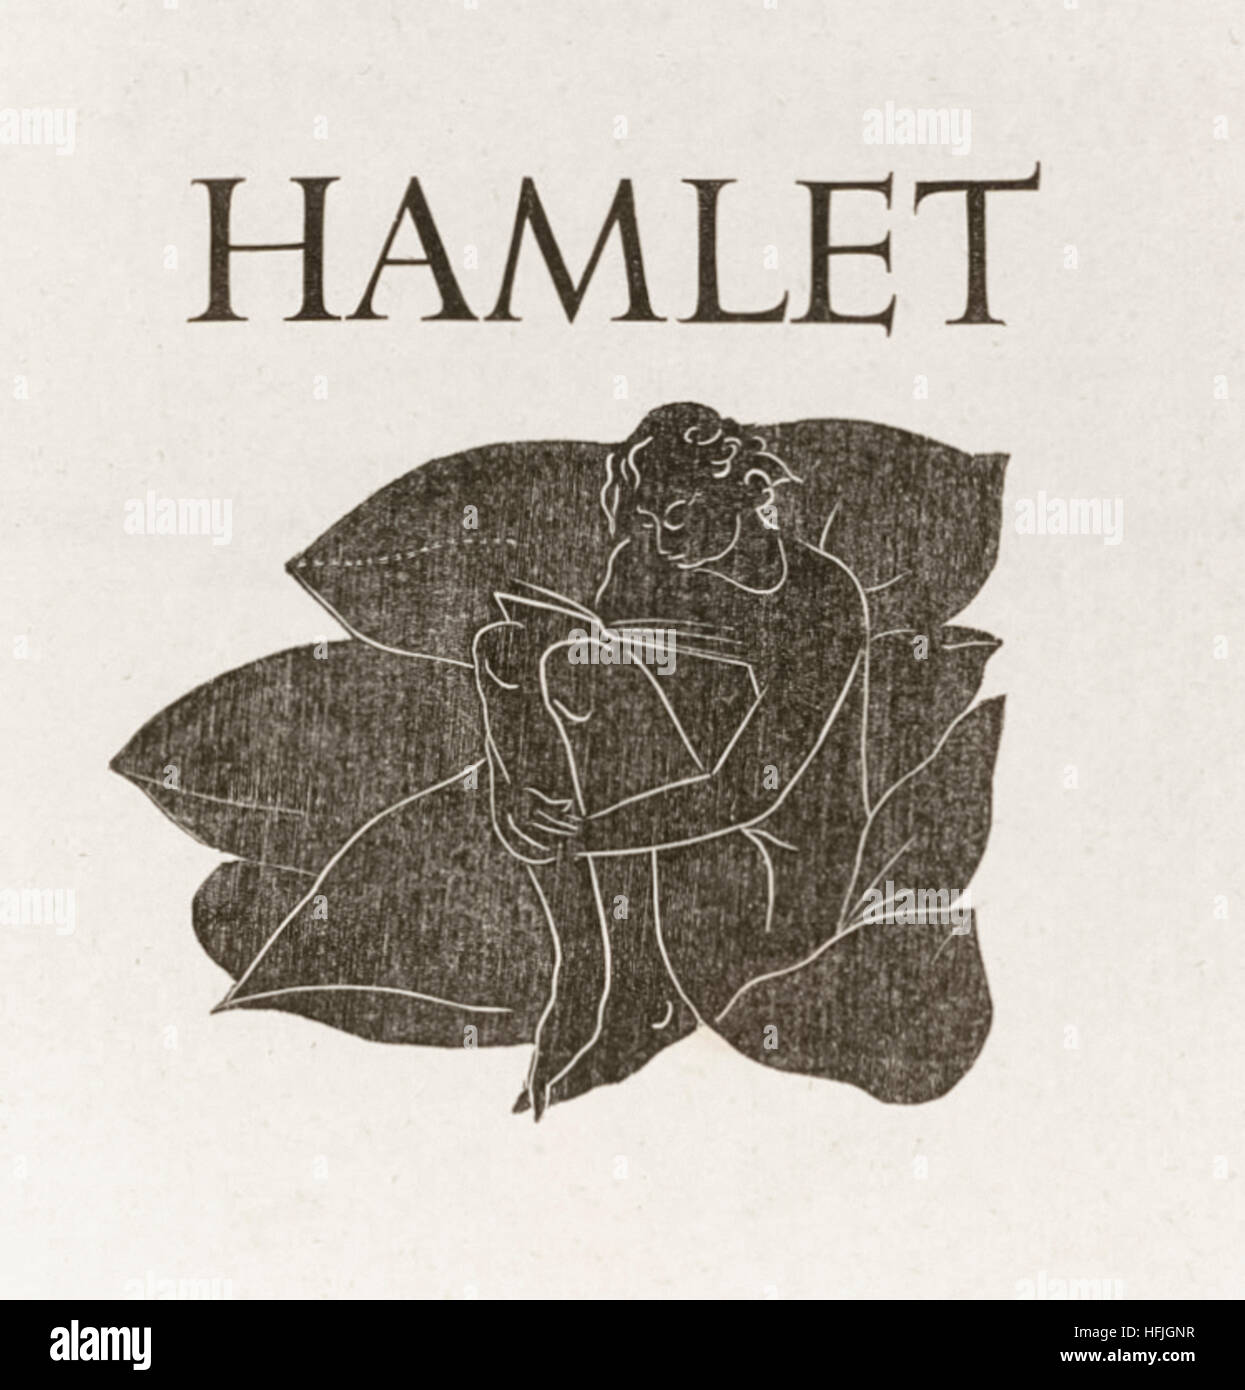 Title page from ‘Hamlet’ by William Shakespeare (1564-1616) featuring a woodcut by Eric Gill (1882-1940). See description for more information. Stock Photo